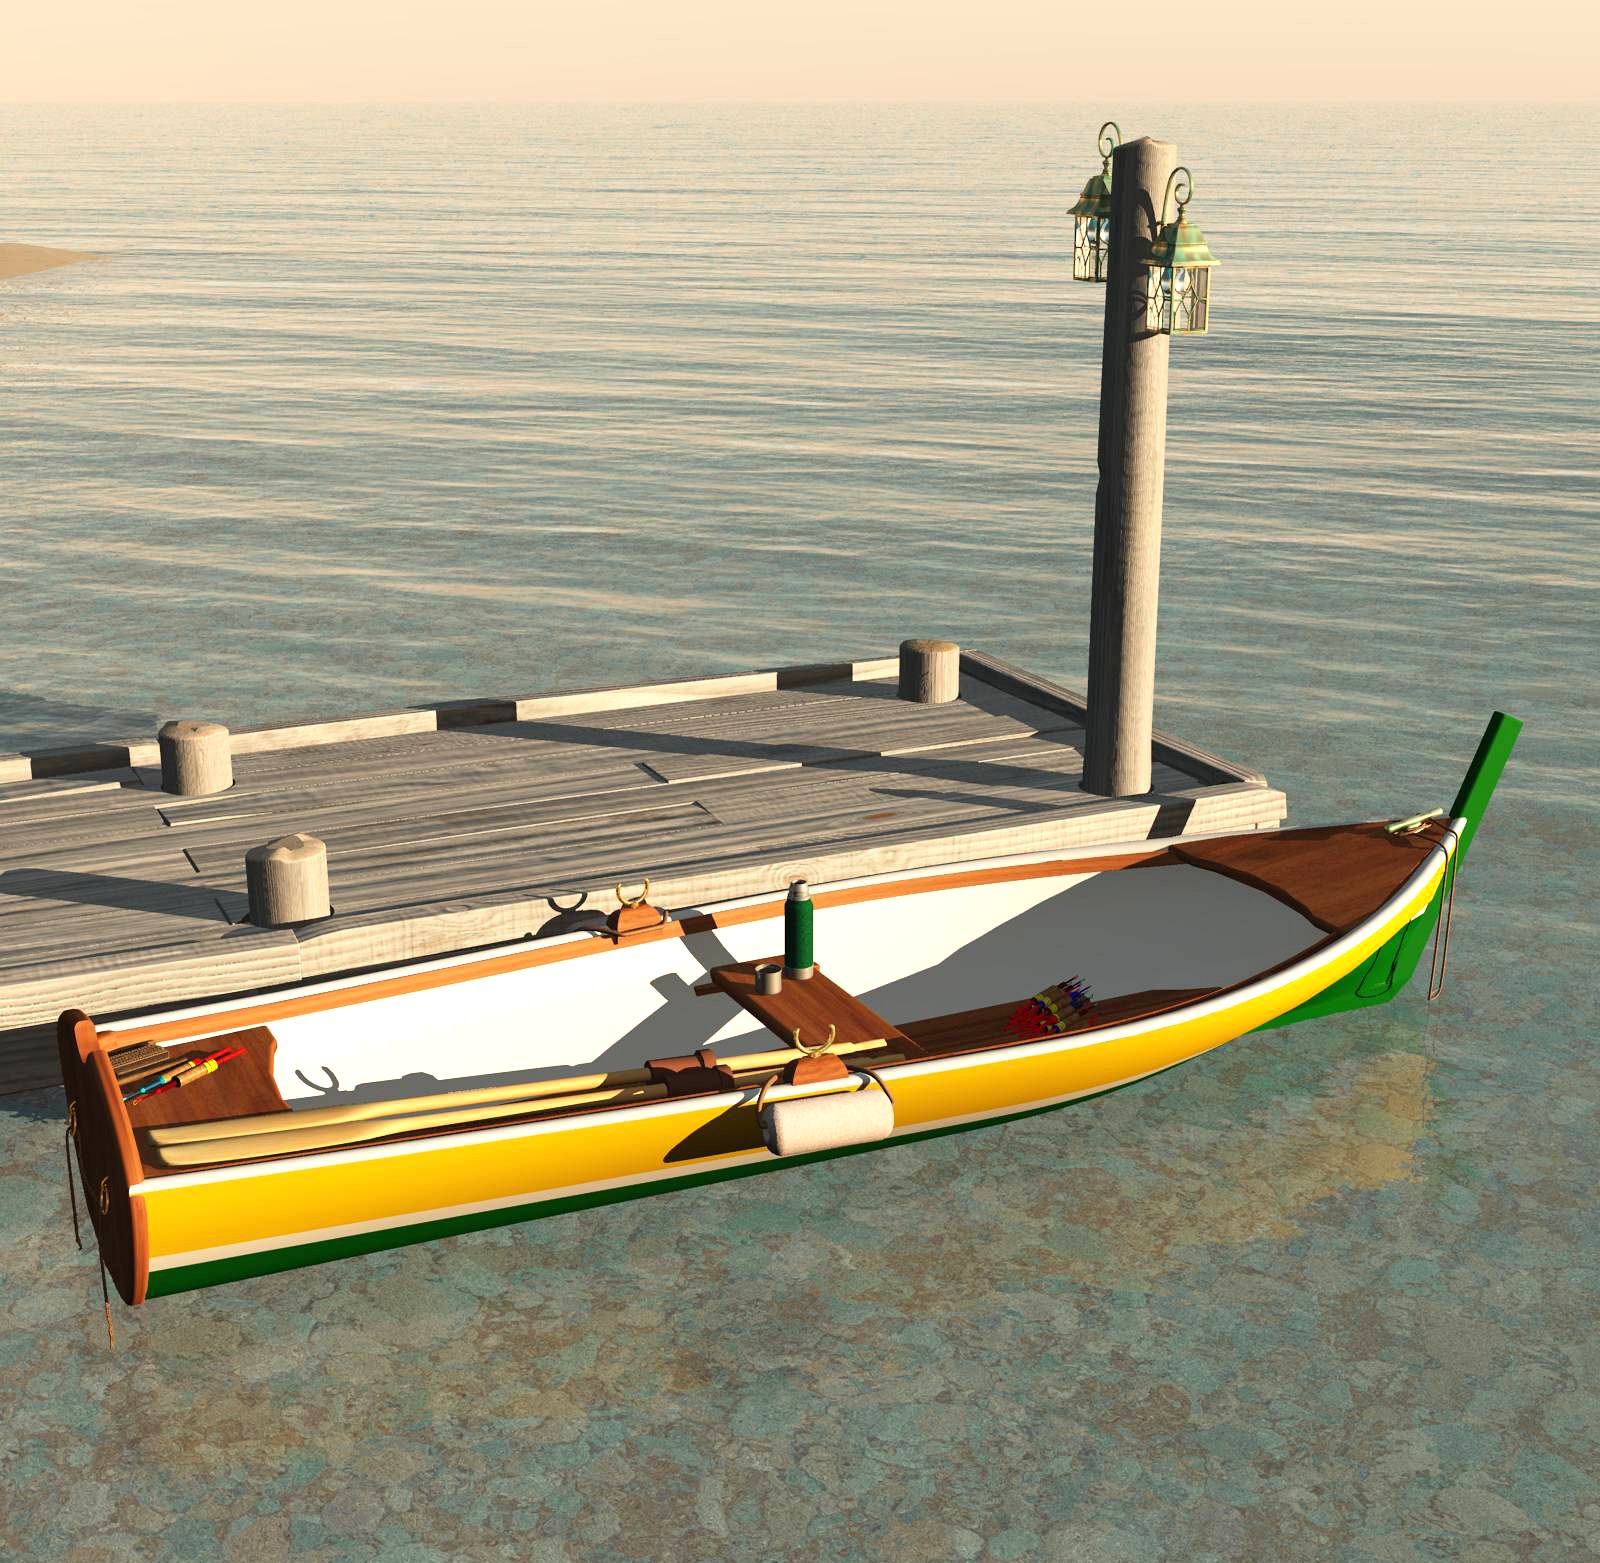 Bay Boat And Pier For Vue